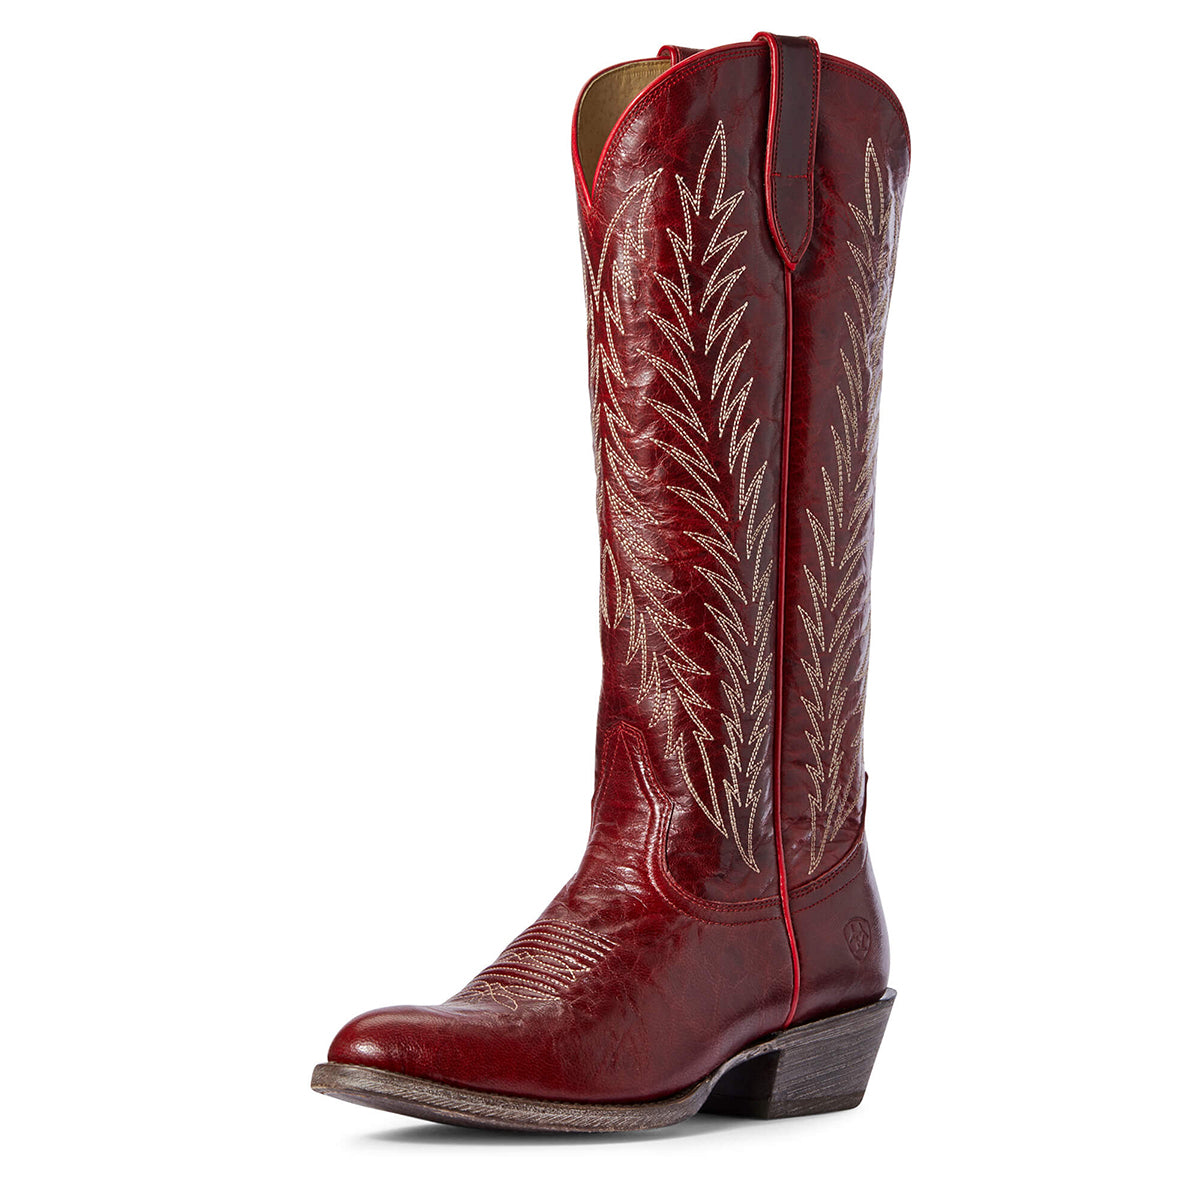 Women's Ariat Legacy Two Step Western Boot in Sangria from the front